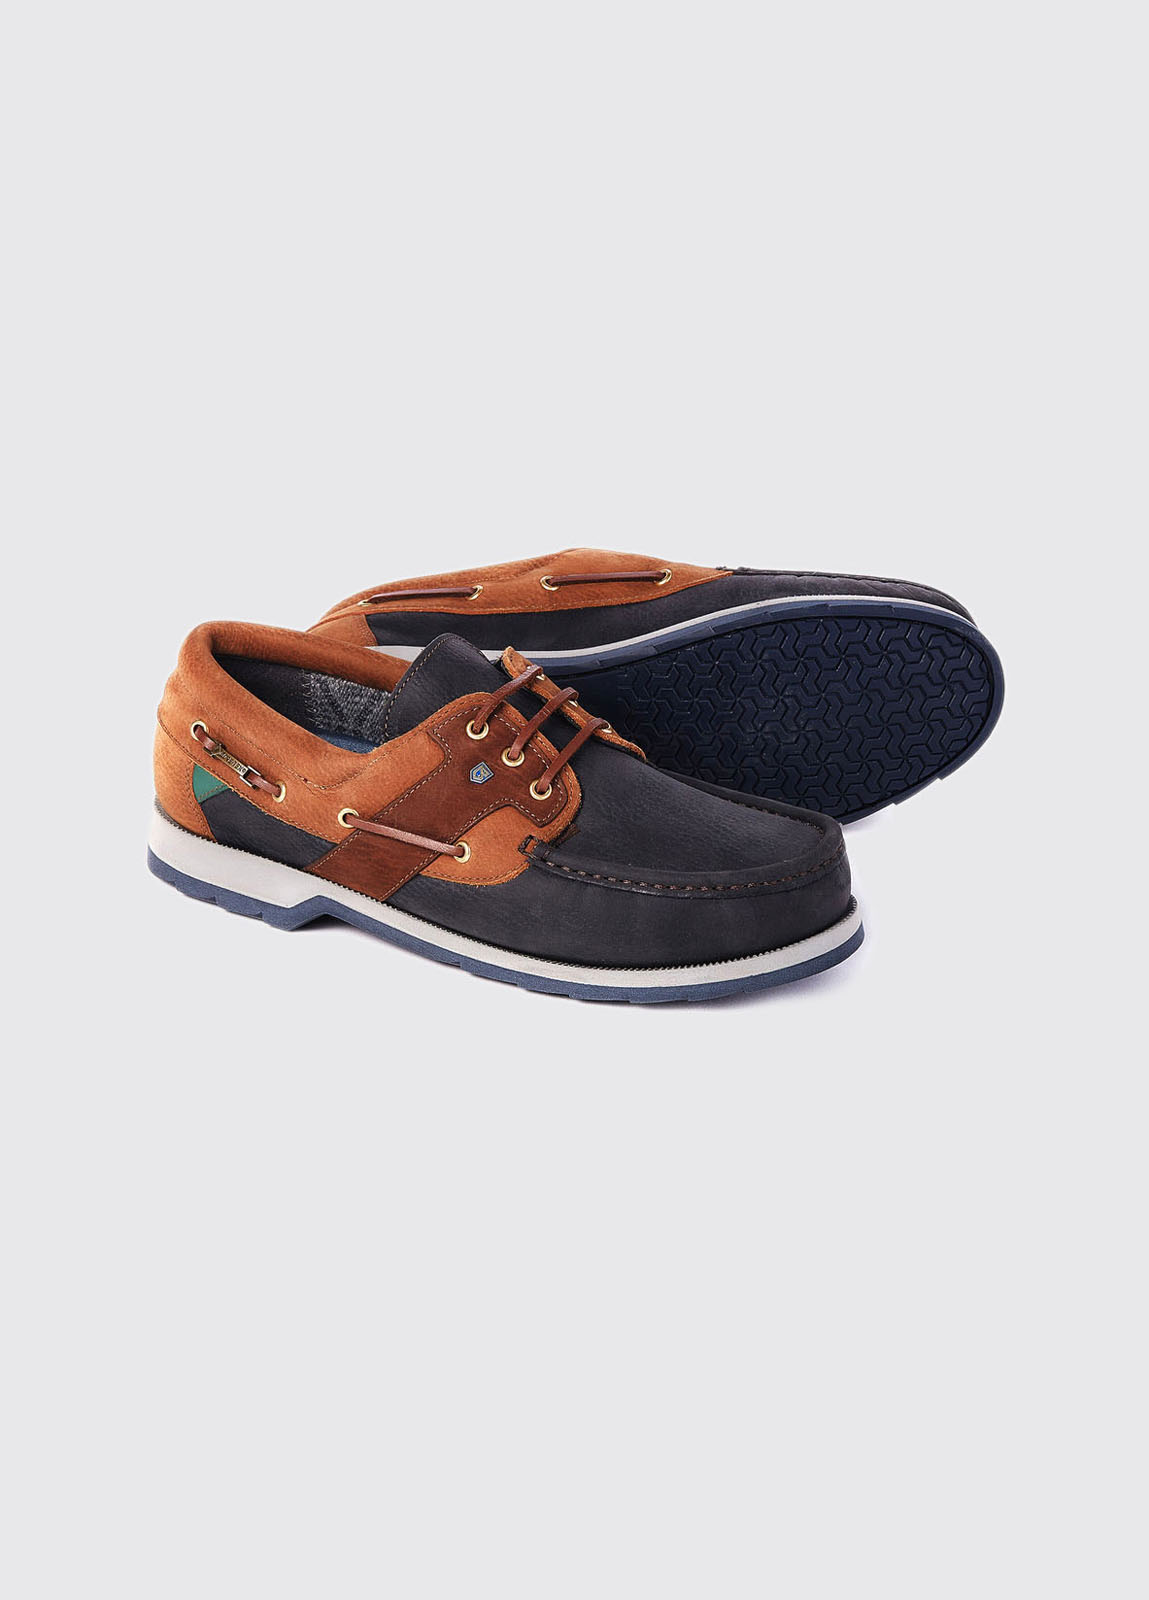 Irreplaceable Do Stræbe Clipper Navy/Brown Deck Shoes | Dubarry IE